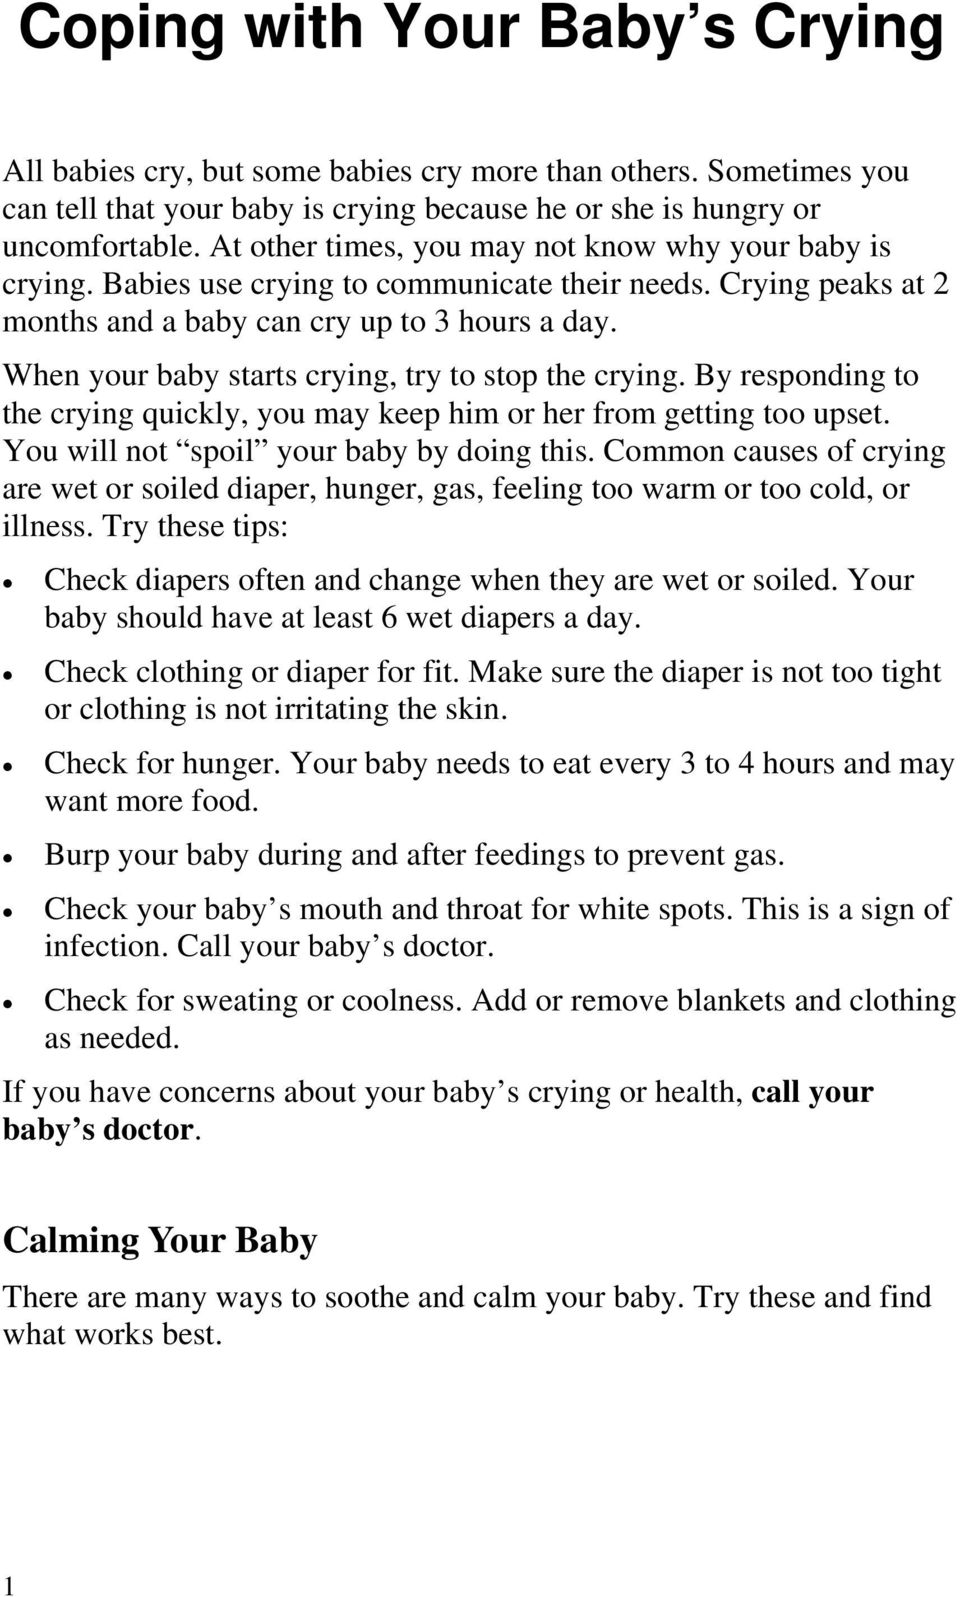 When your baby starts crying, try to stop the crying. By responding to the crying quickly, you may keep him or her from getting too upset. You will not spoil your baby by doing this.